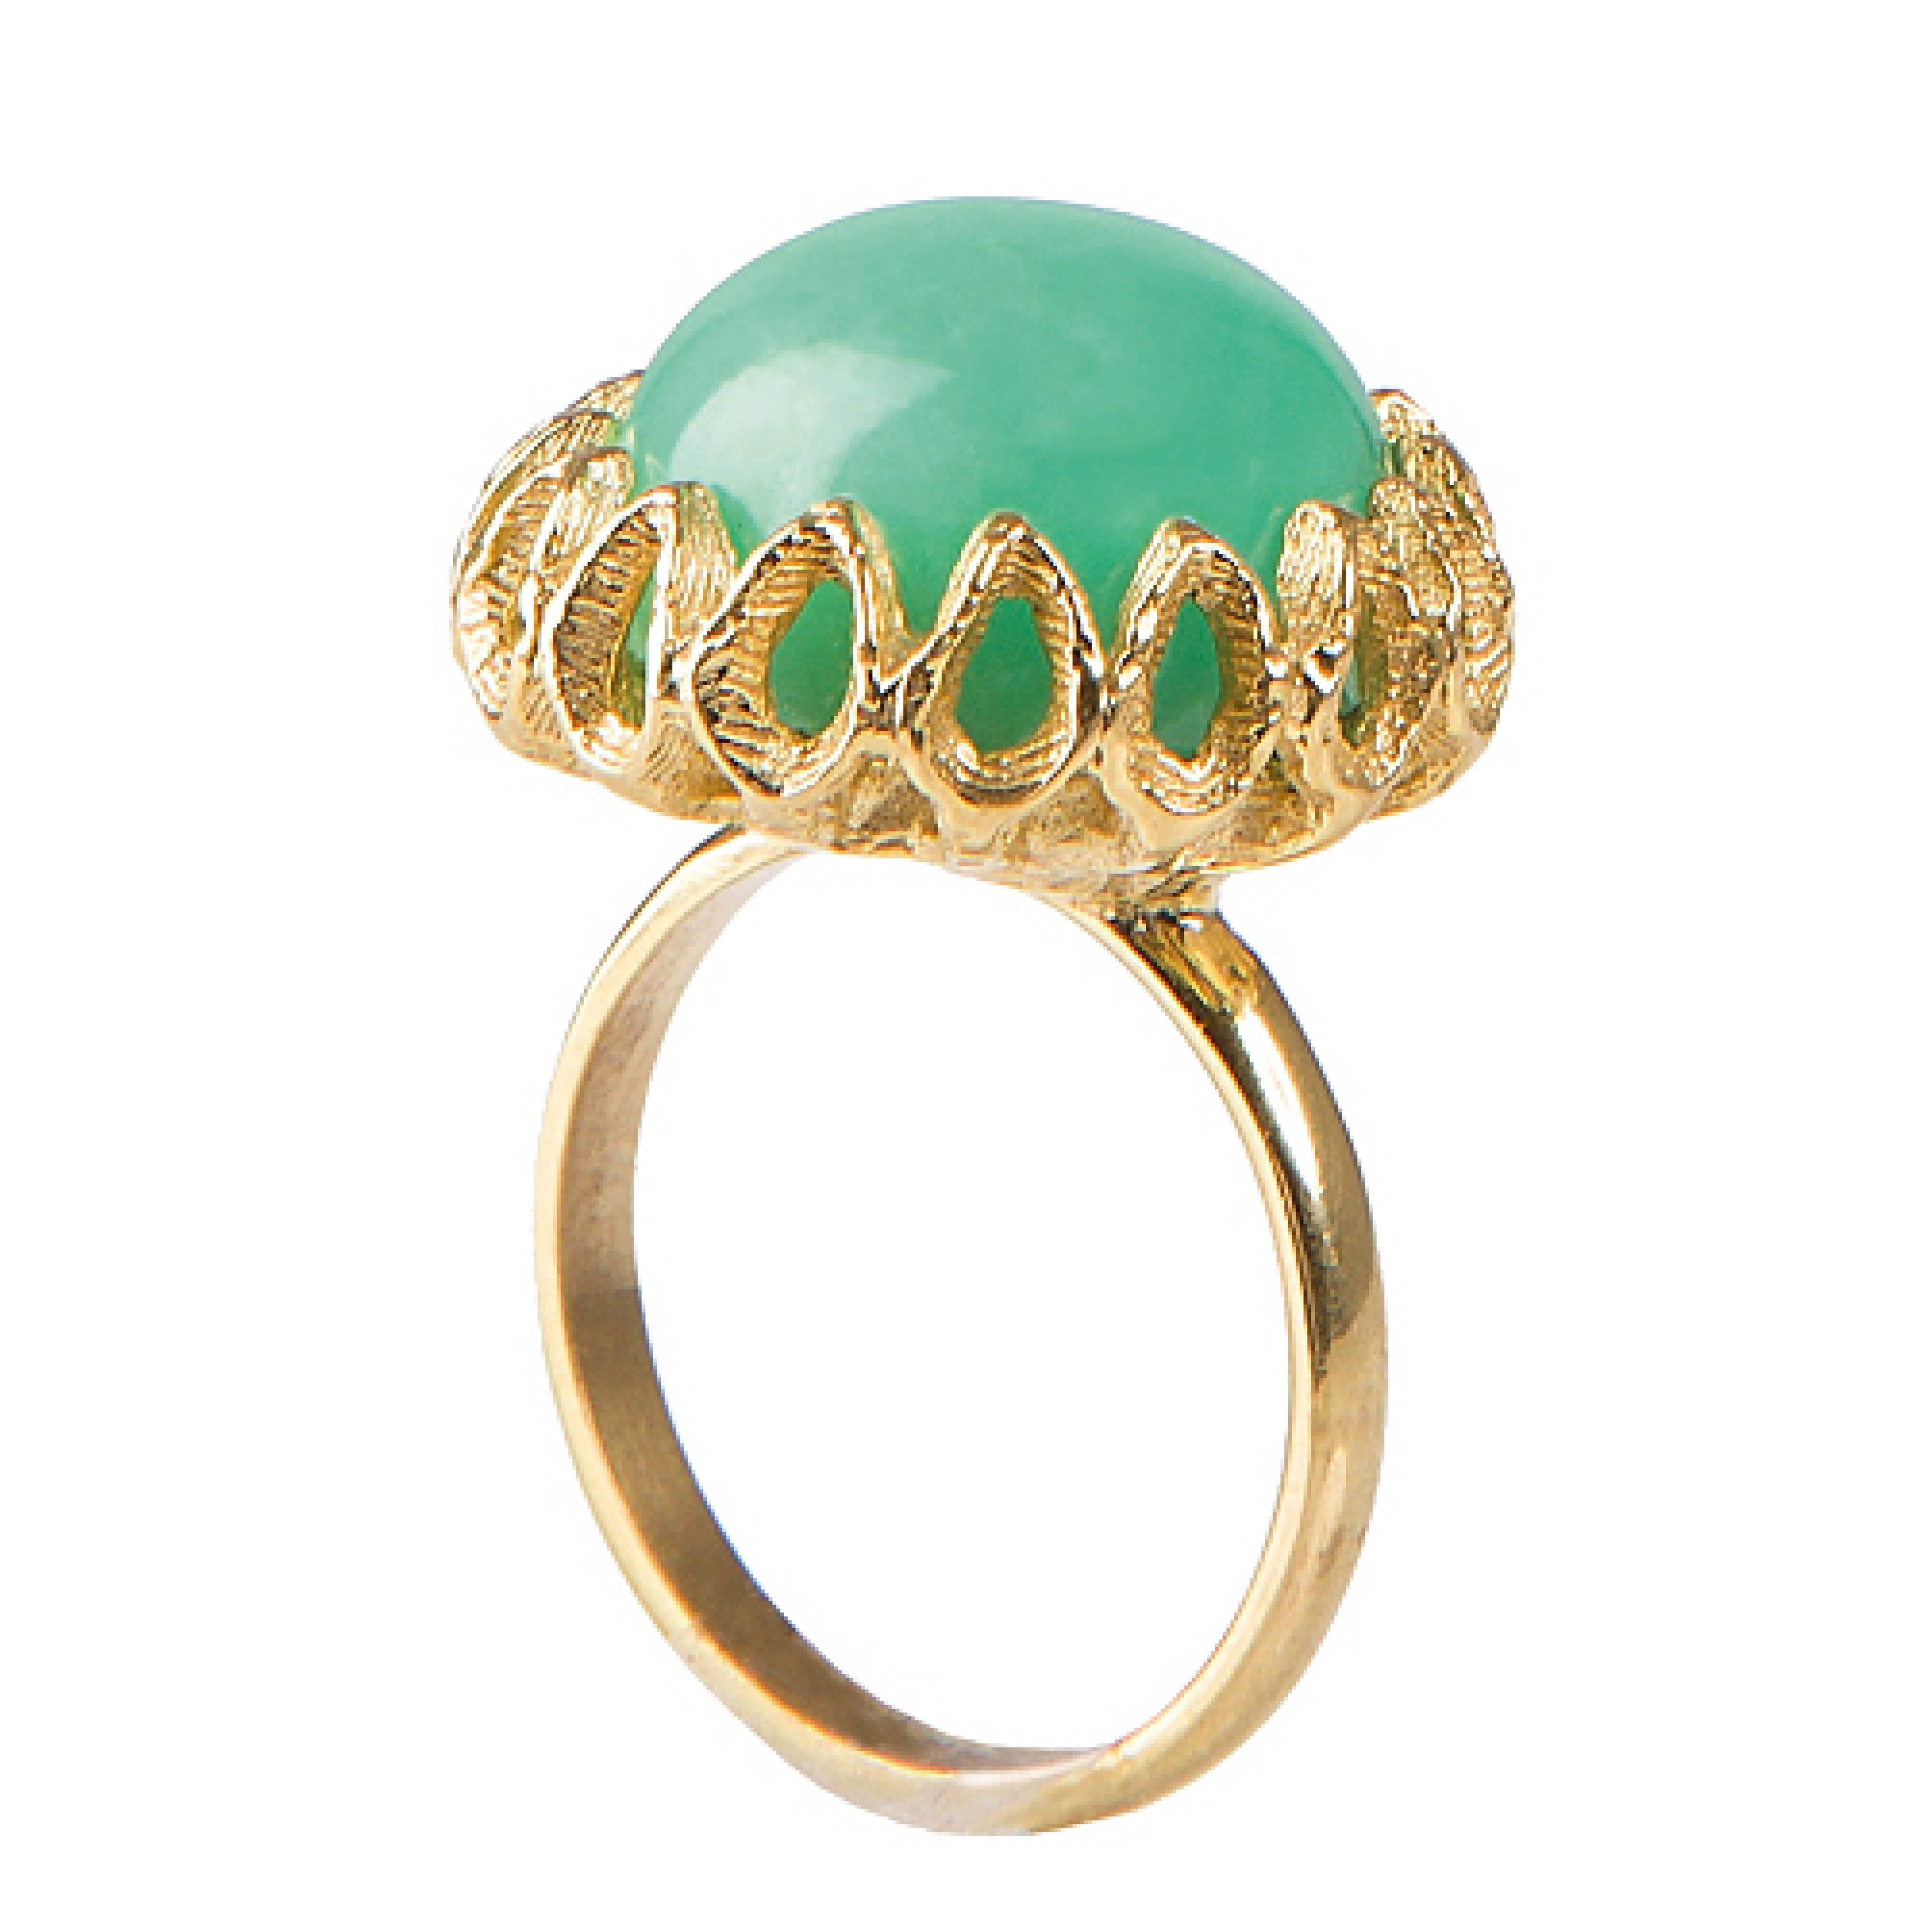 Cocktail ring of chrysoprase gemstone set in 18kt gold plated band. 

Size 6 US. Approx. 16 carat natural chrysoprase sourced from conflict-free mines in Namibia, Africa. Made by hand in London. 

The Fouché collection is designed by Claire